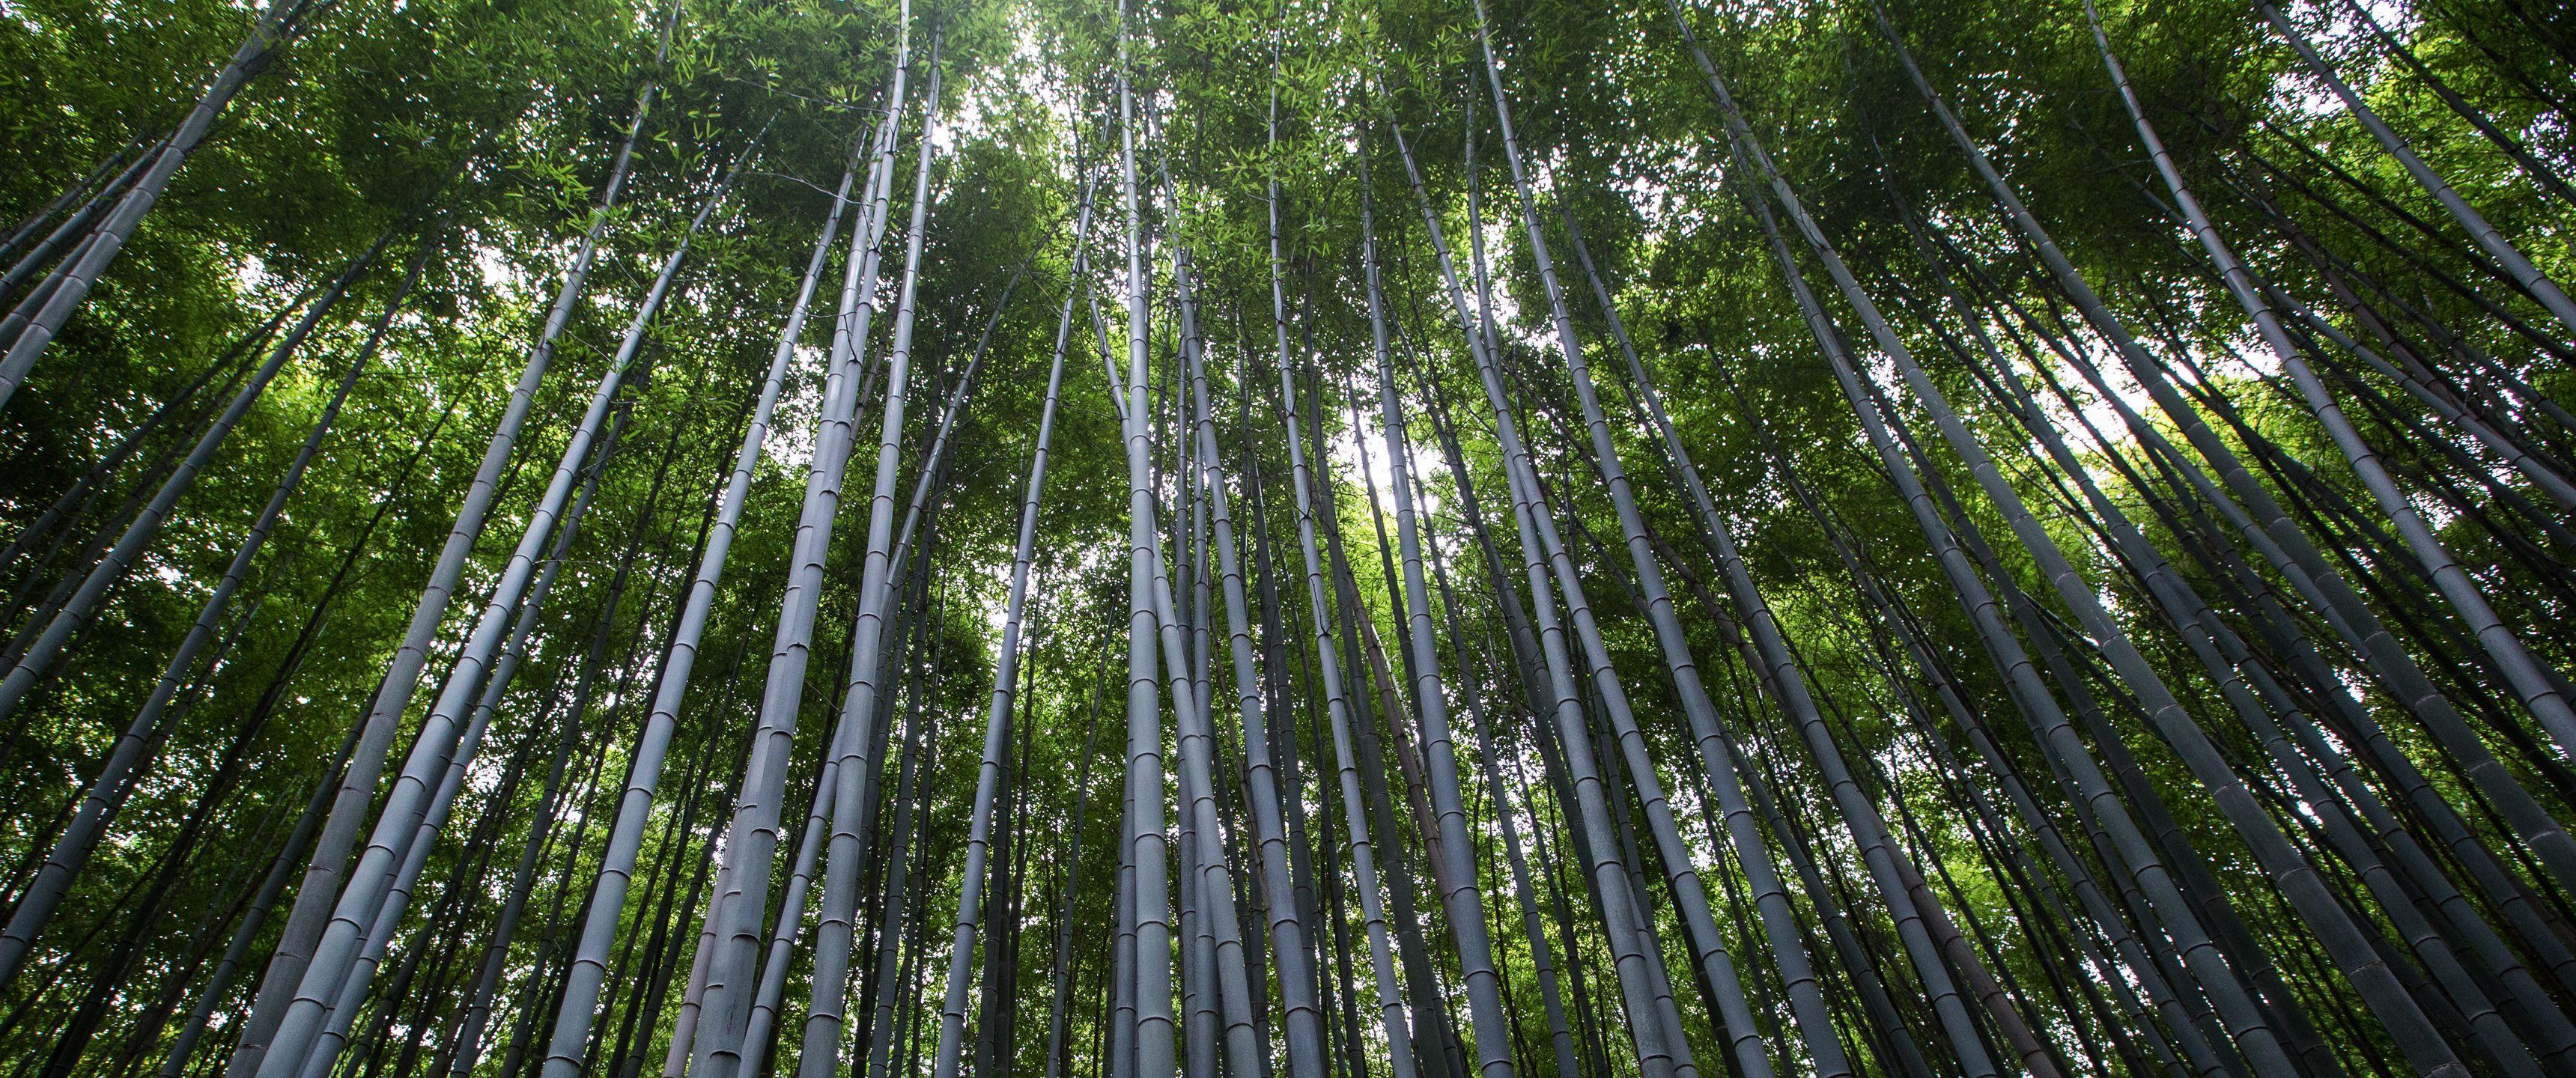 Forest of Bamboo 21:9 Wallpaper. Ultrawide Monitor 21:9 Wallpaper